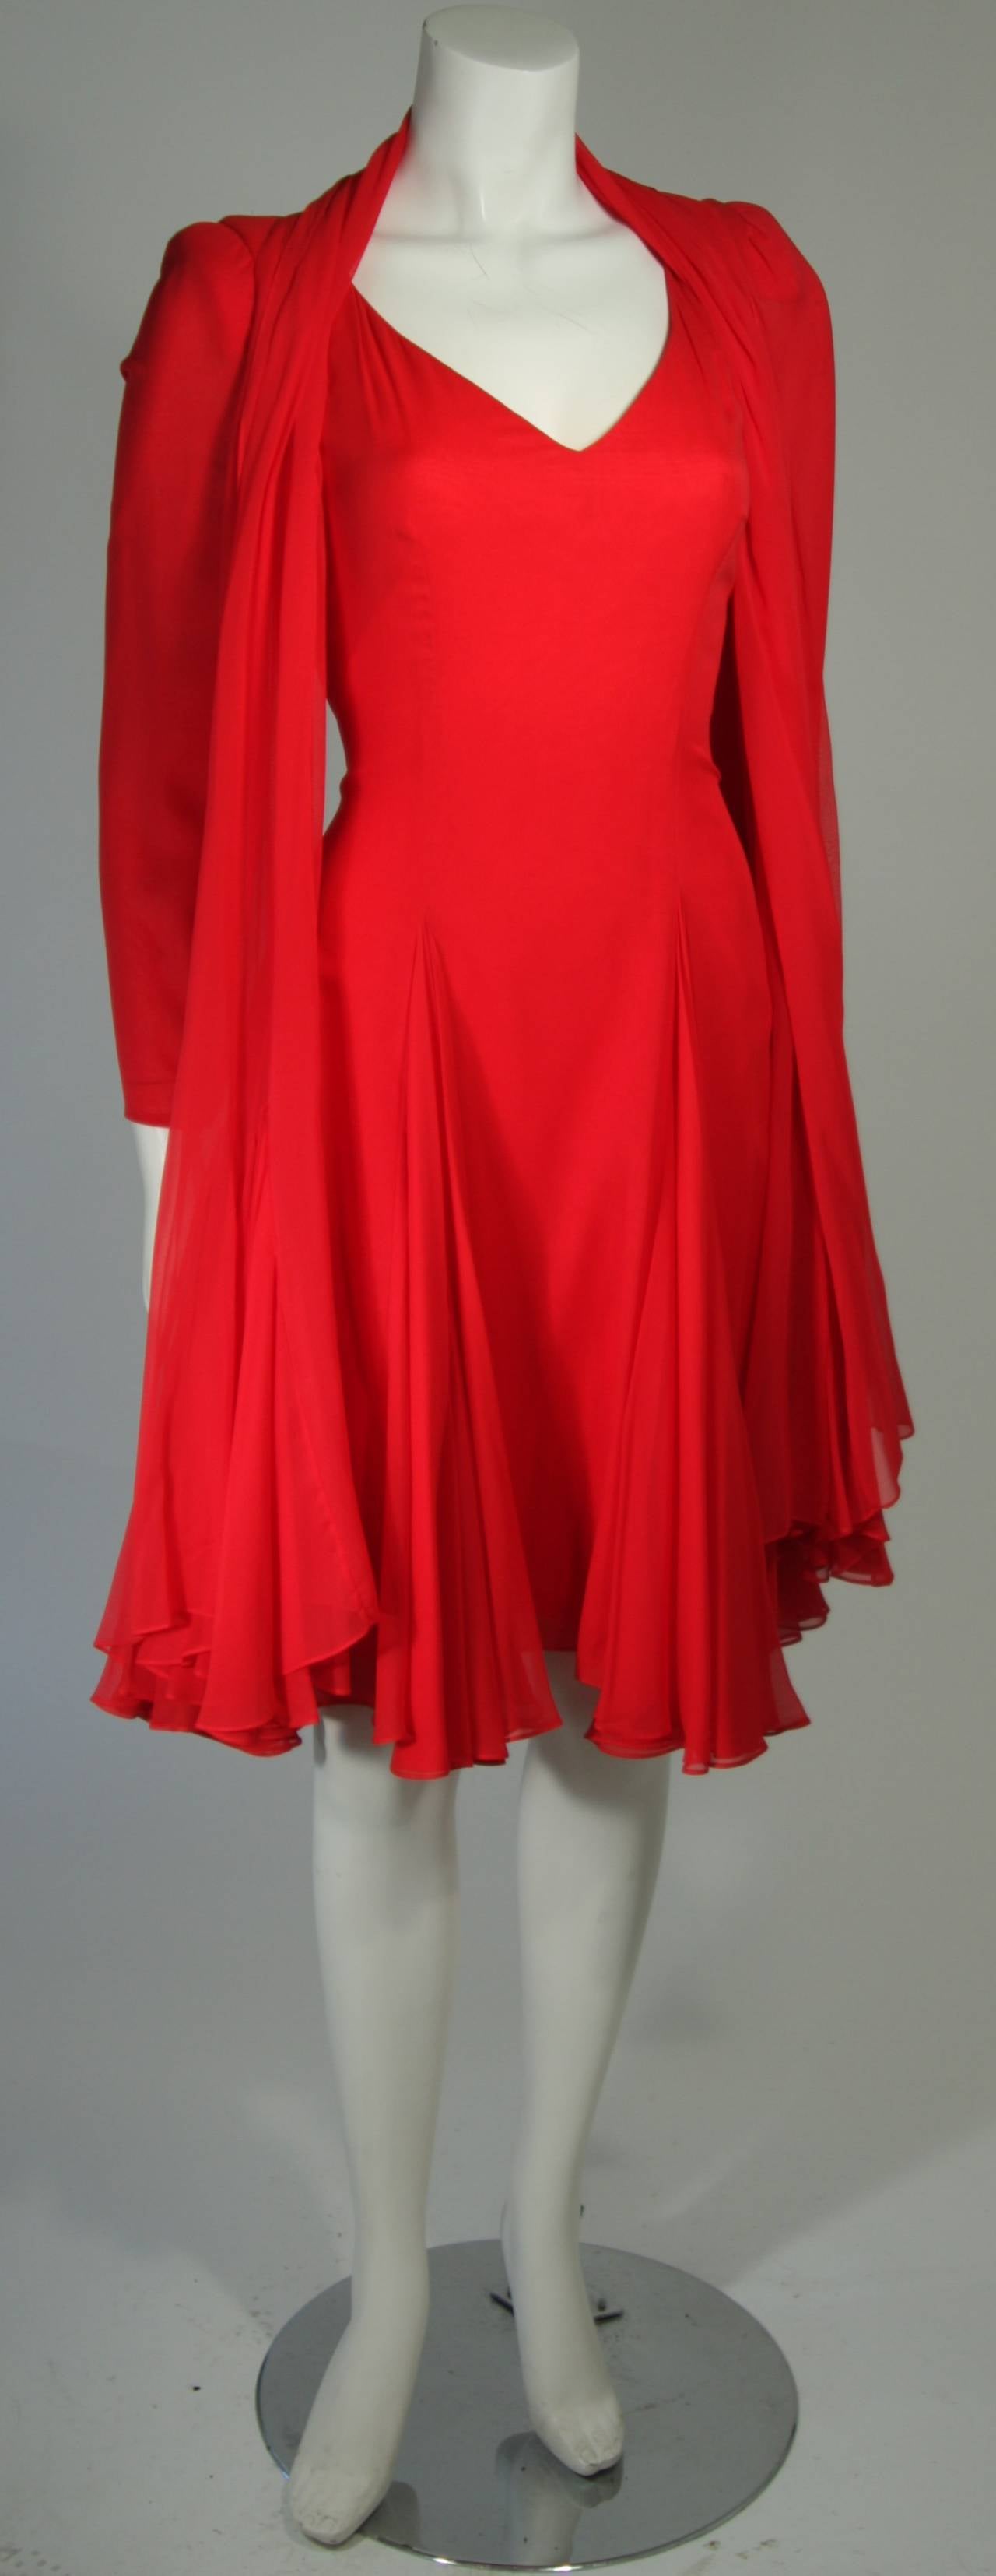 This Travilla cocktail dress is composed of a fabulous red silk chiffon and is coupled with a matching shawl. The dress features a body skimming design which is accented by godets at the skirt, the shawl has the same flared styling. There is a